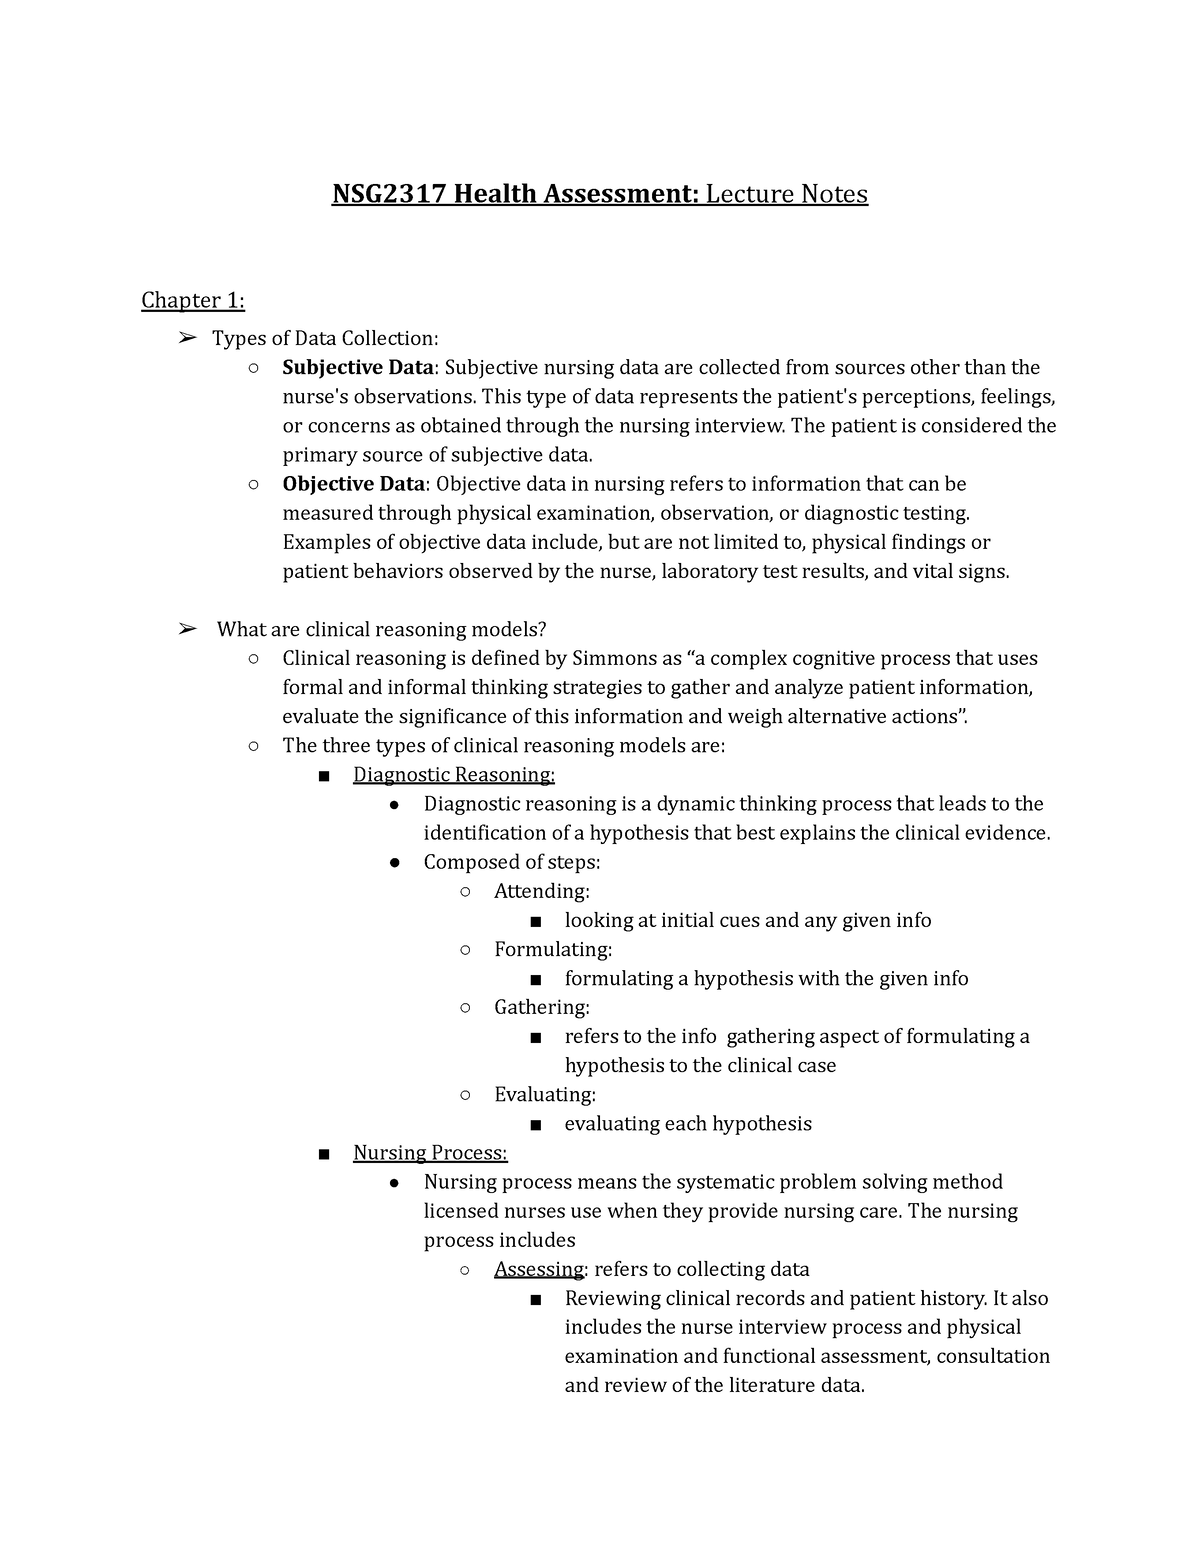 Nsg2317 Health Assessment Lecture Notes Nsg2317 Health Assessment Lecture Notes Chapter 1 7721